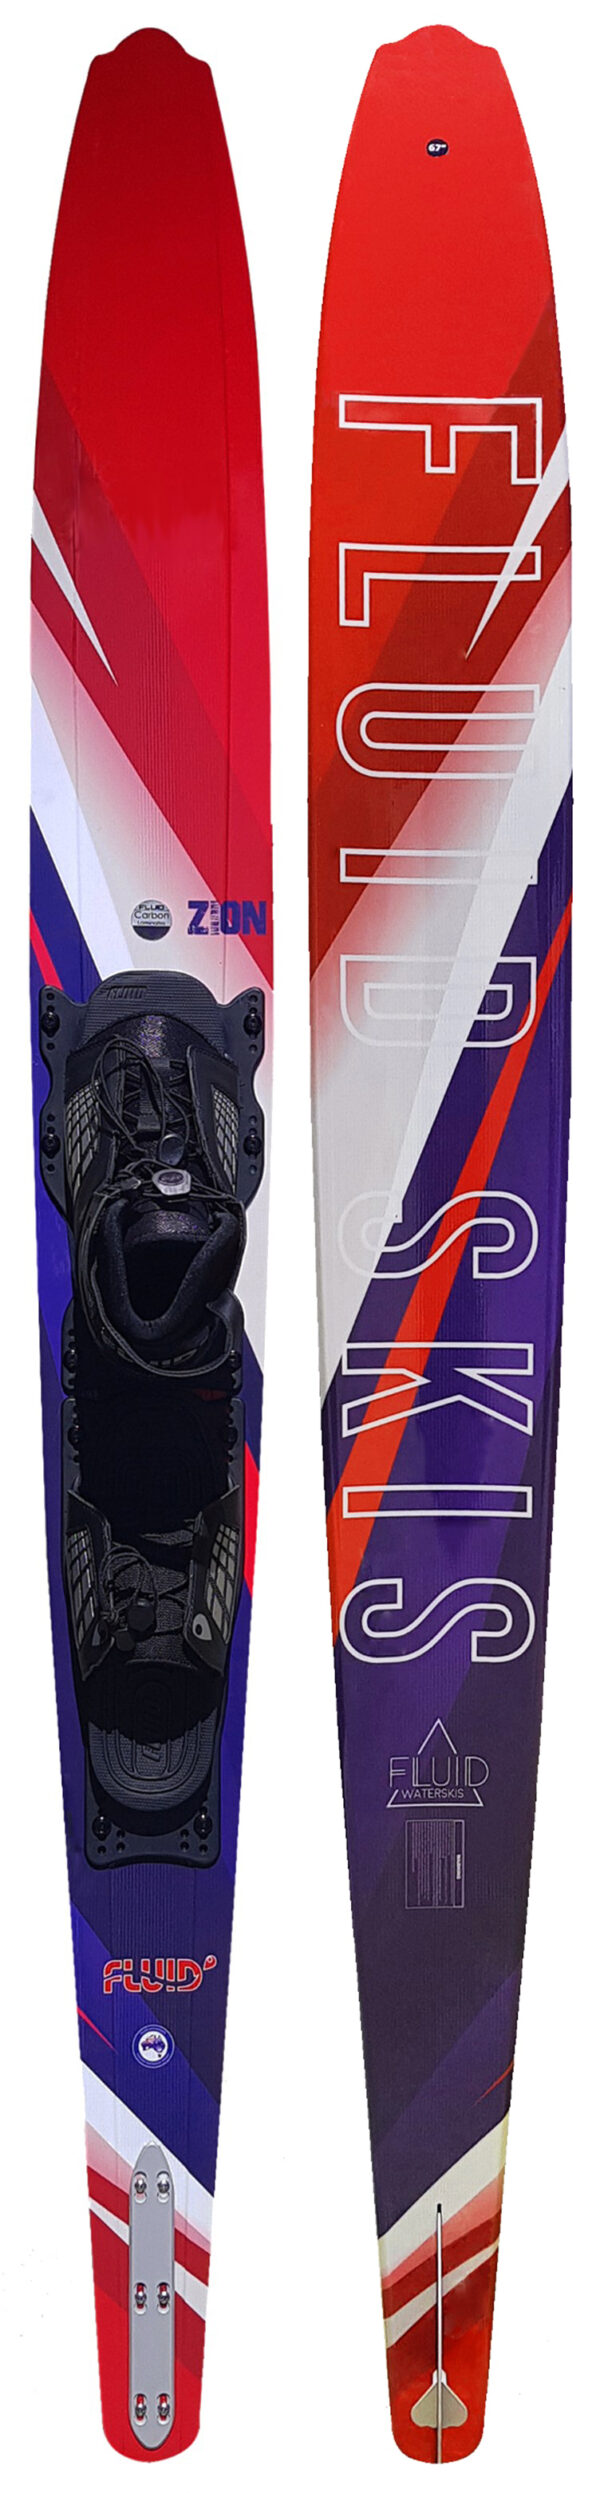 Fluid Zion Mens Slalom Ski With Genesis Boot and ARTP